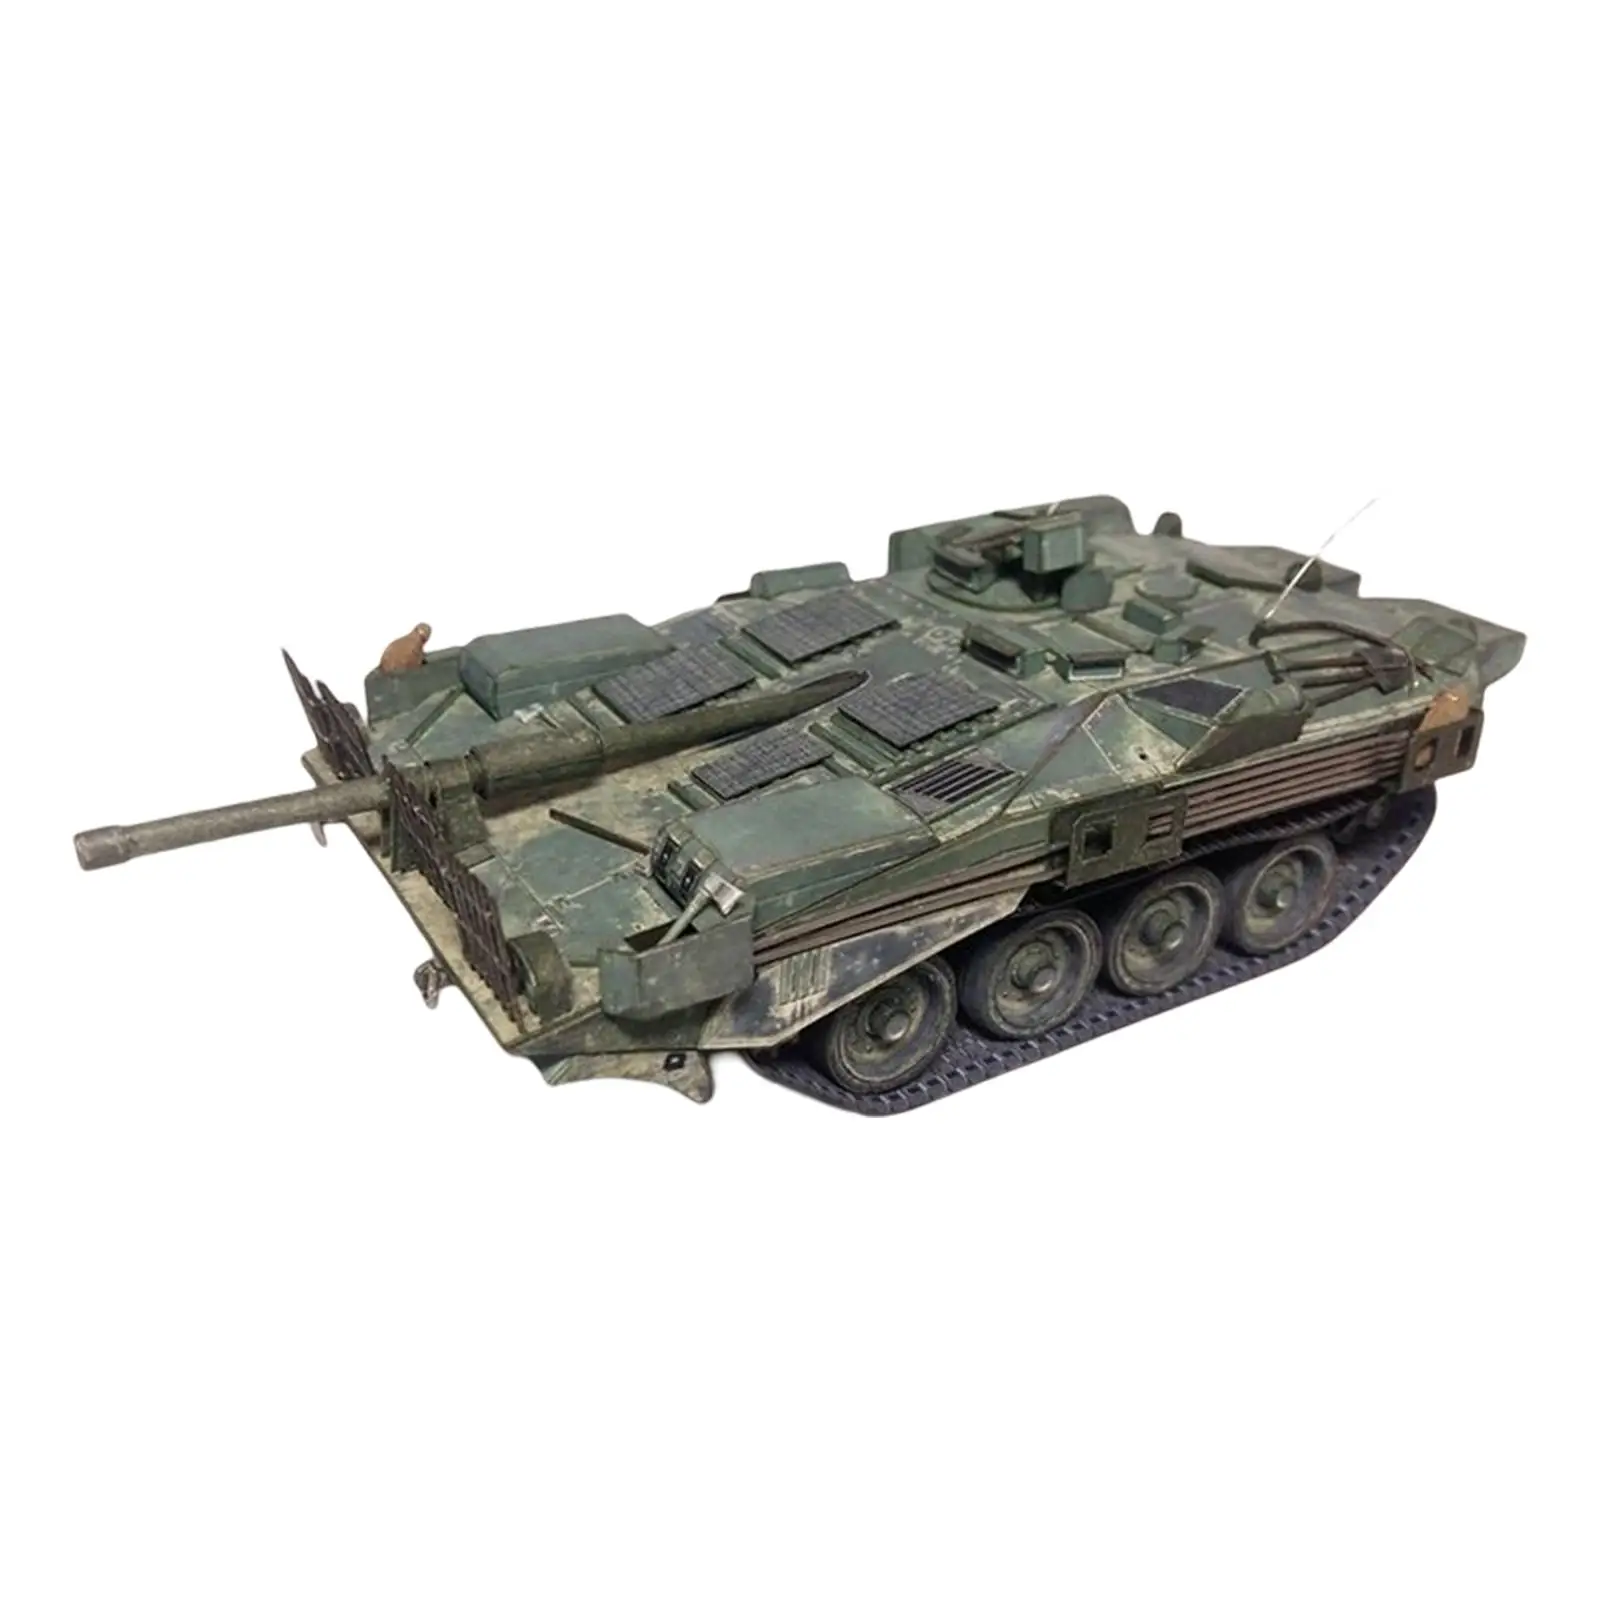 1/35 Tank Model Ornament Tabletop Decor DIY Assemble Toy for Birthday Gifts